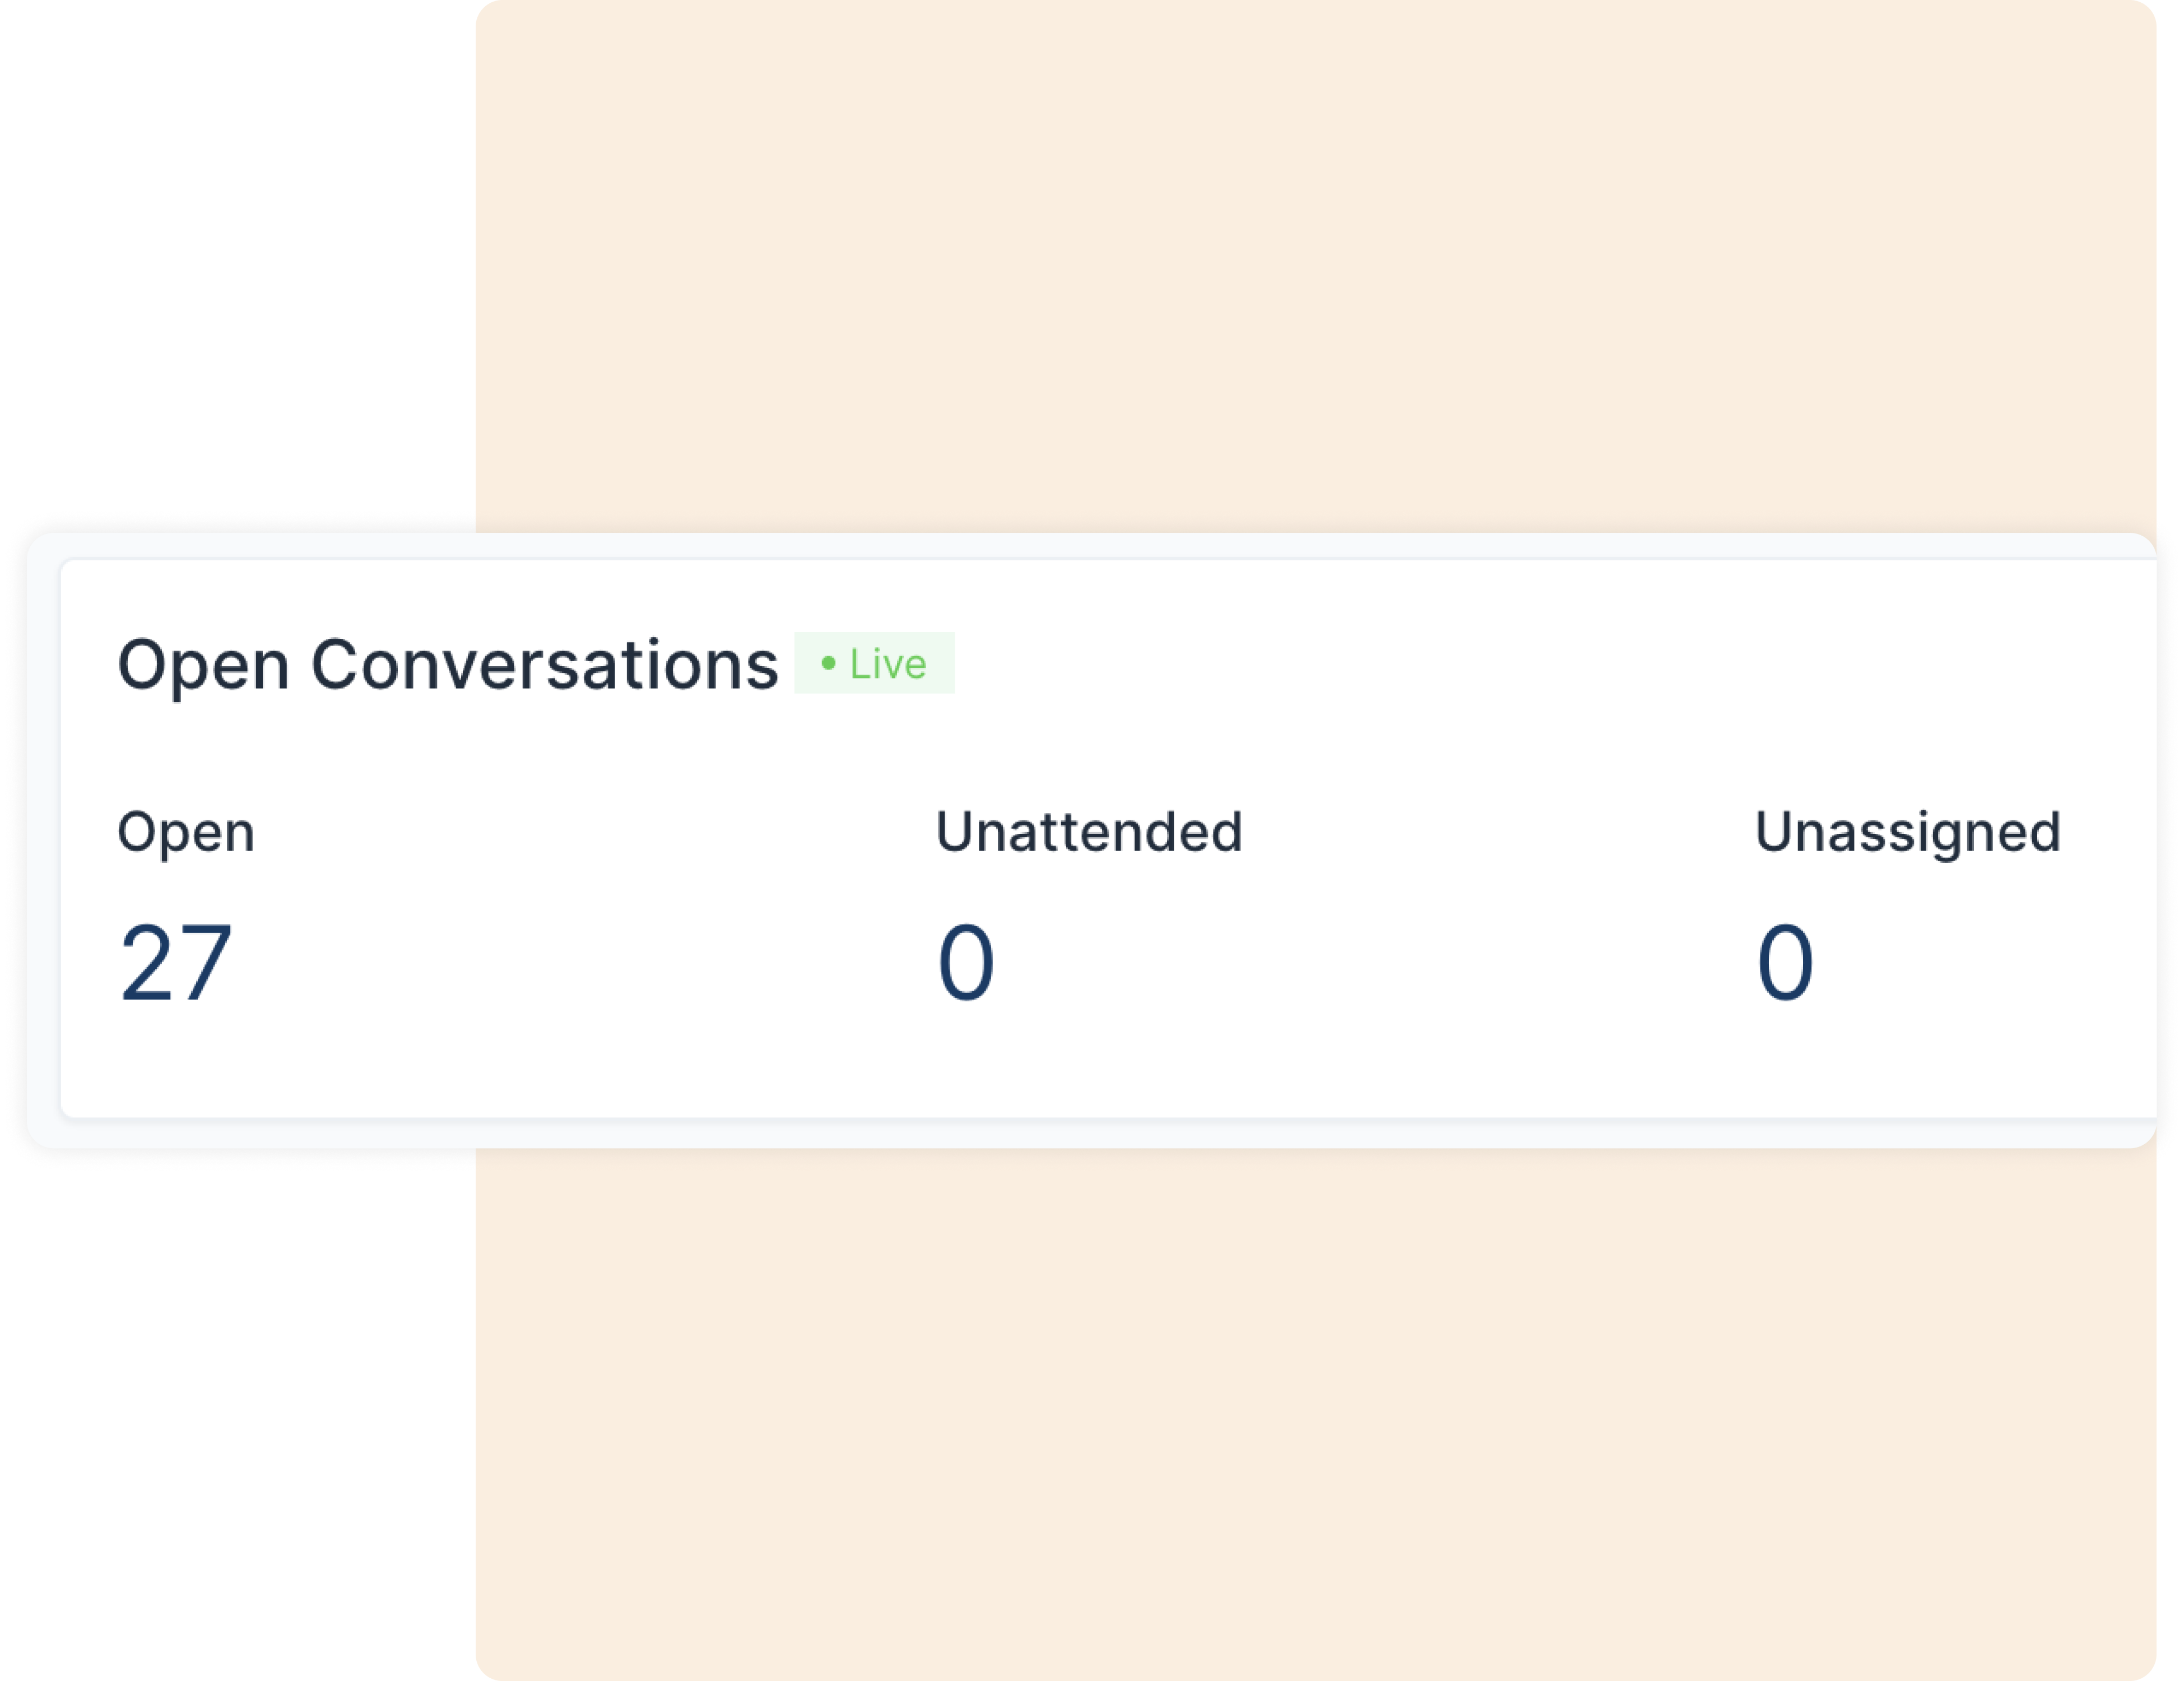 See how many conversations are currently open